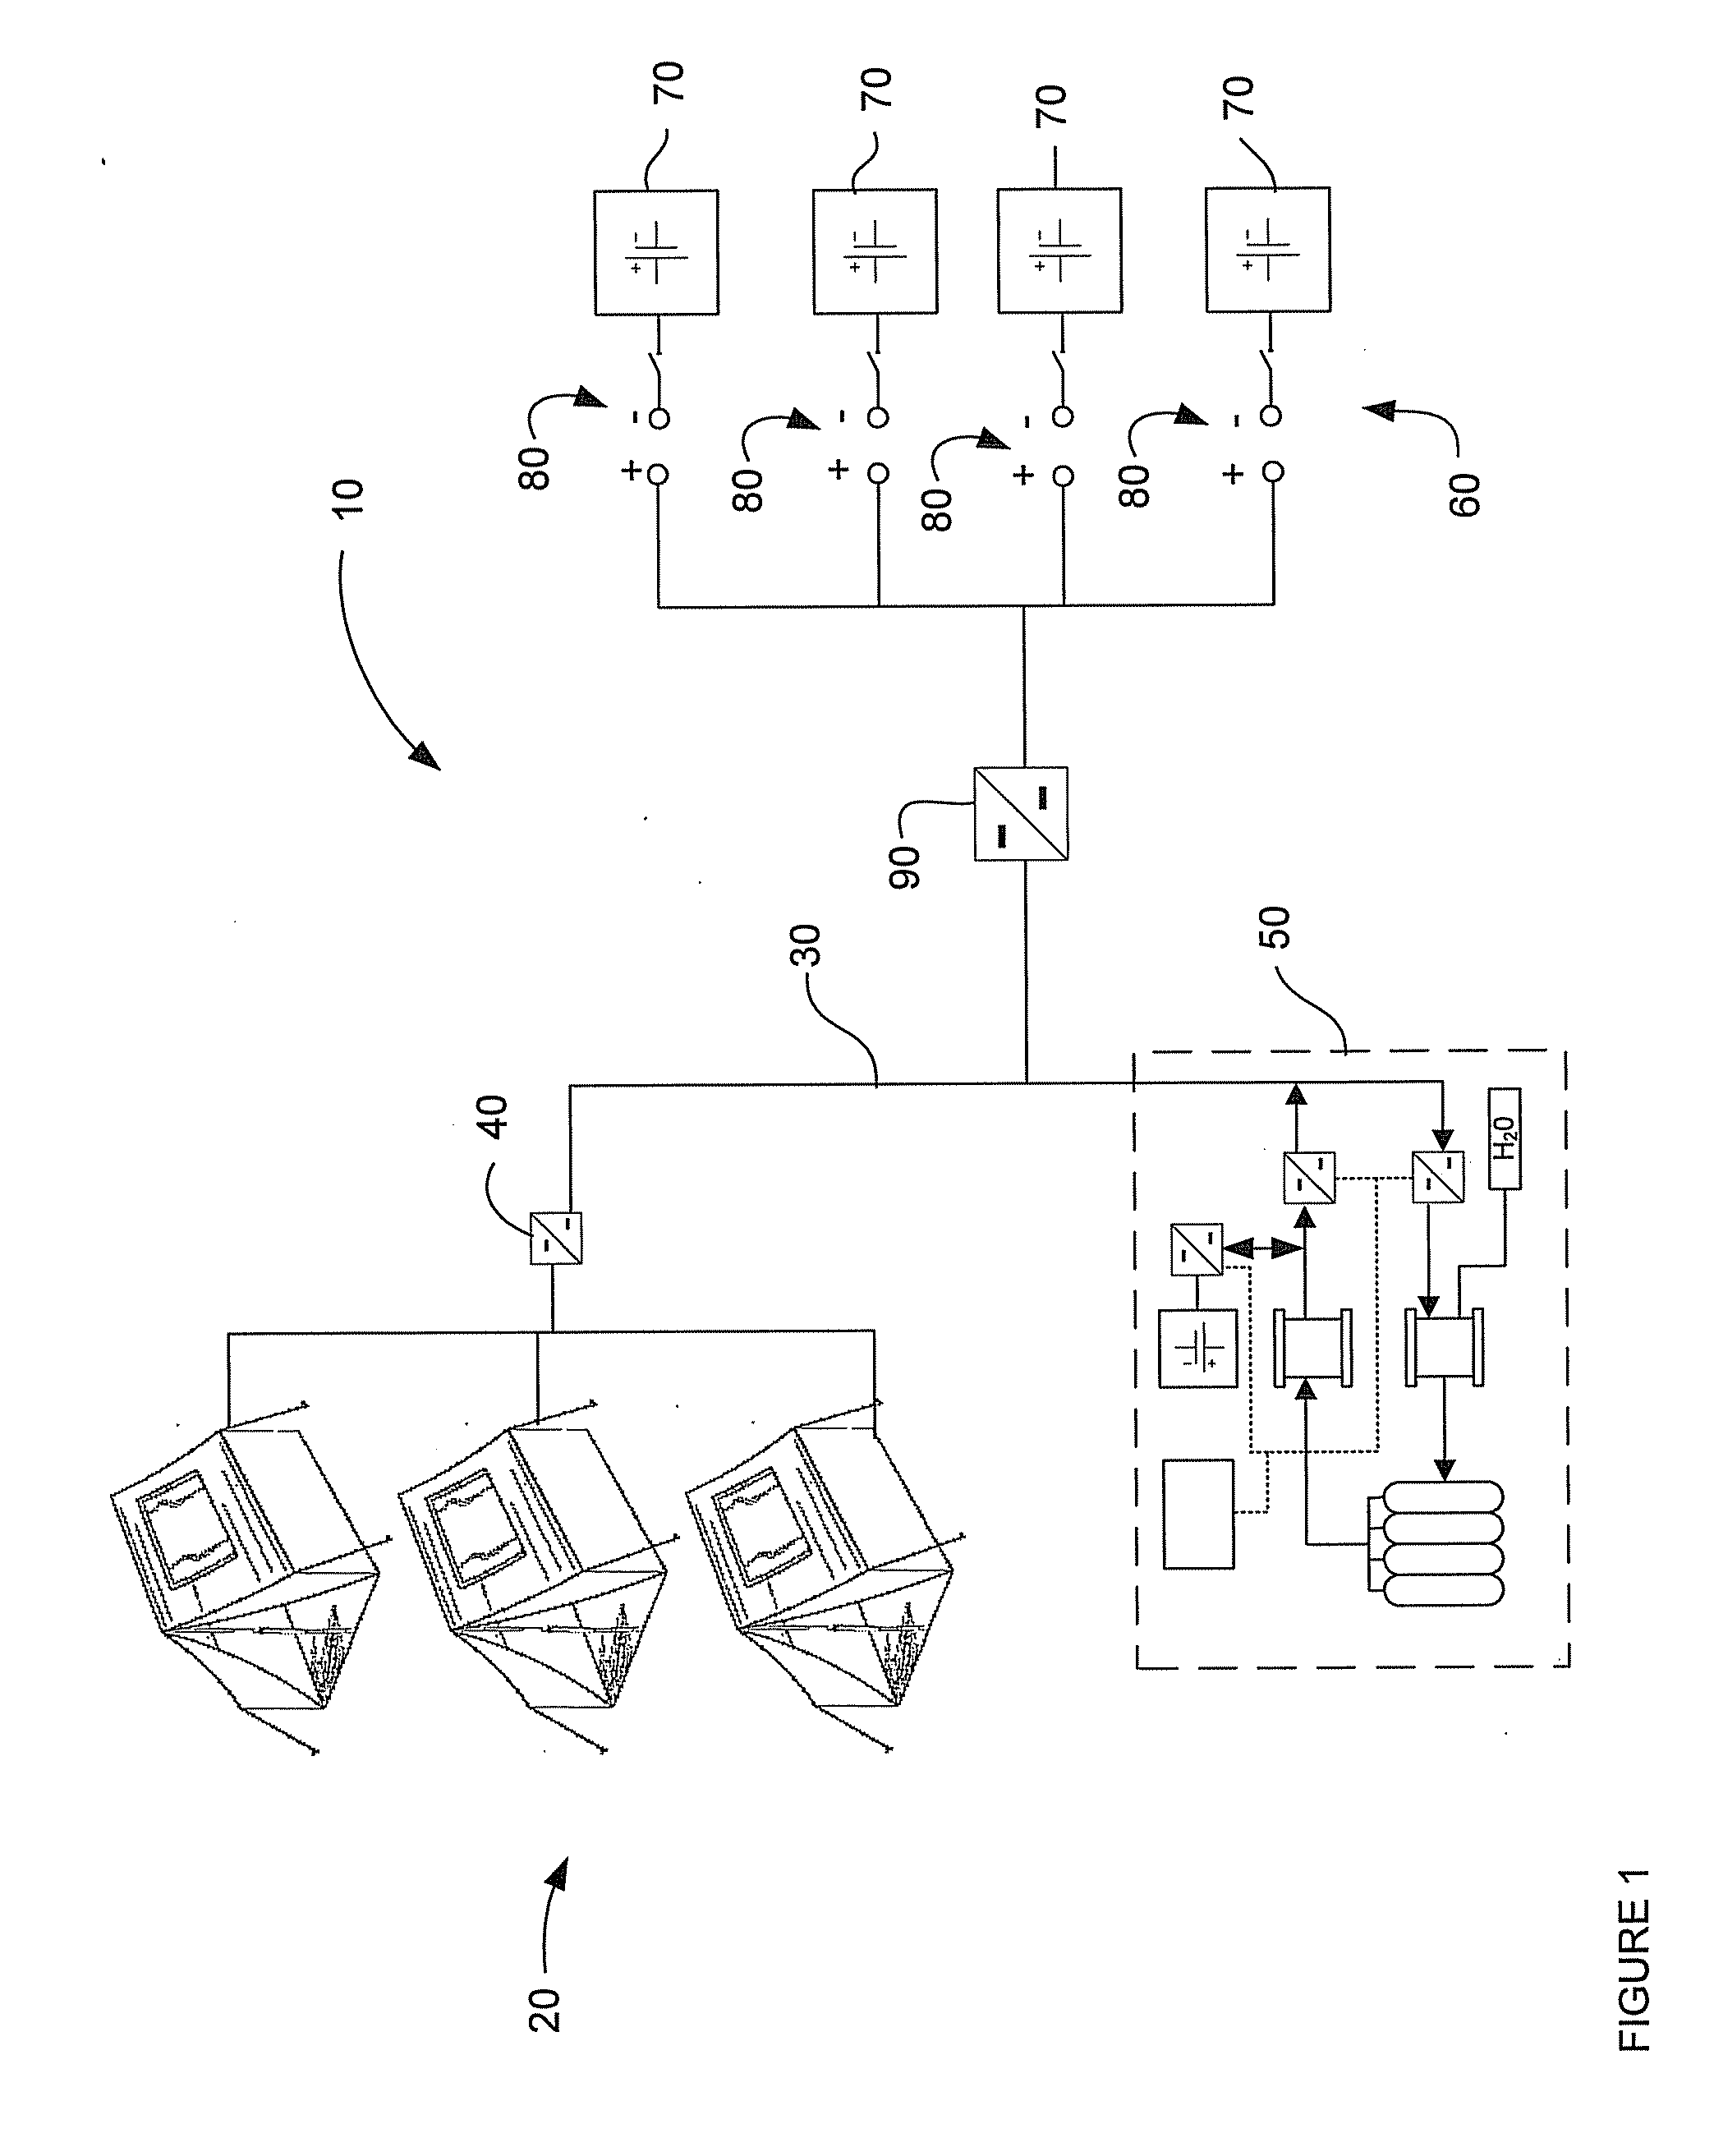 Field Deployable Power Distribution system and Method Thereof